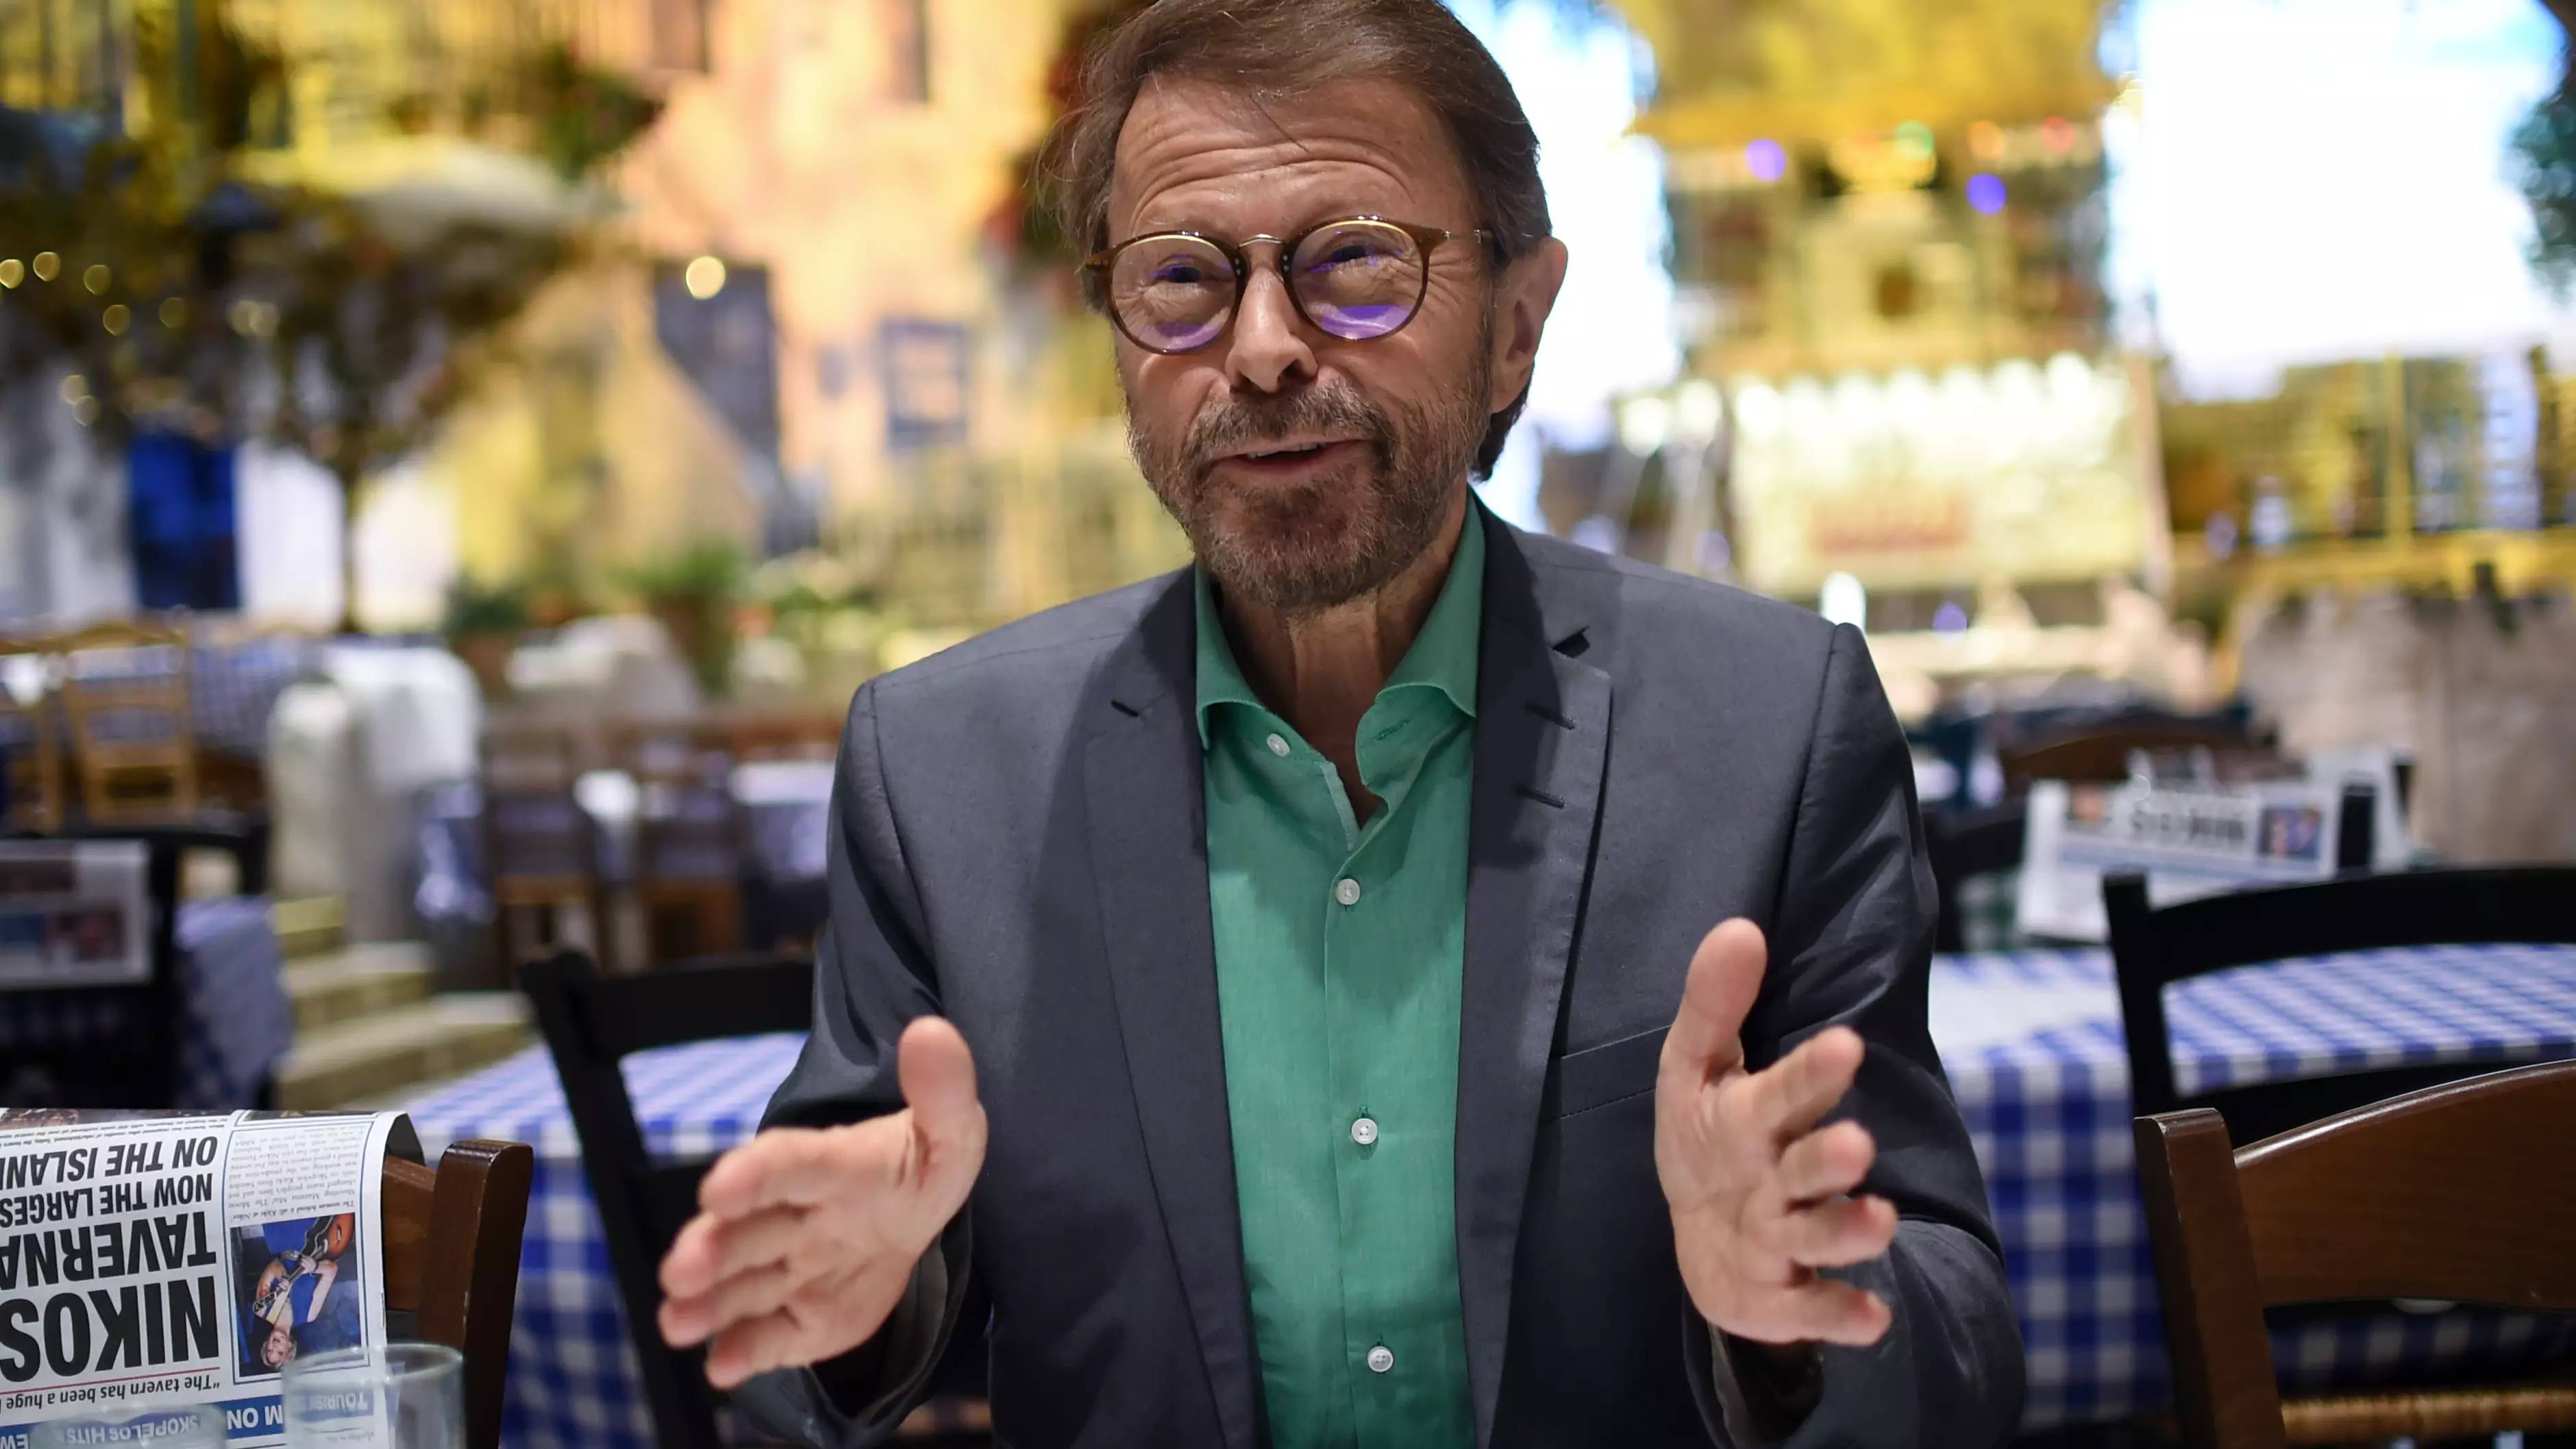 ABBA's Björn Ulvaeus, 75, Says He Has Sex 'Four Times A Week'